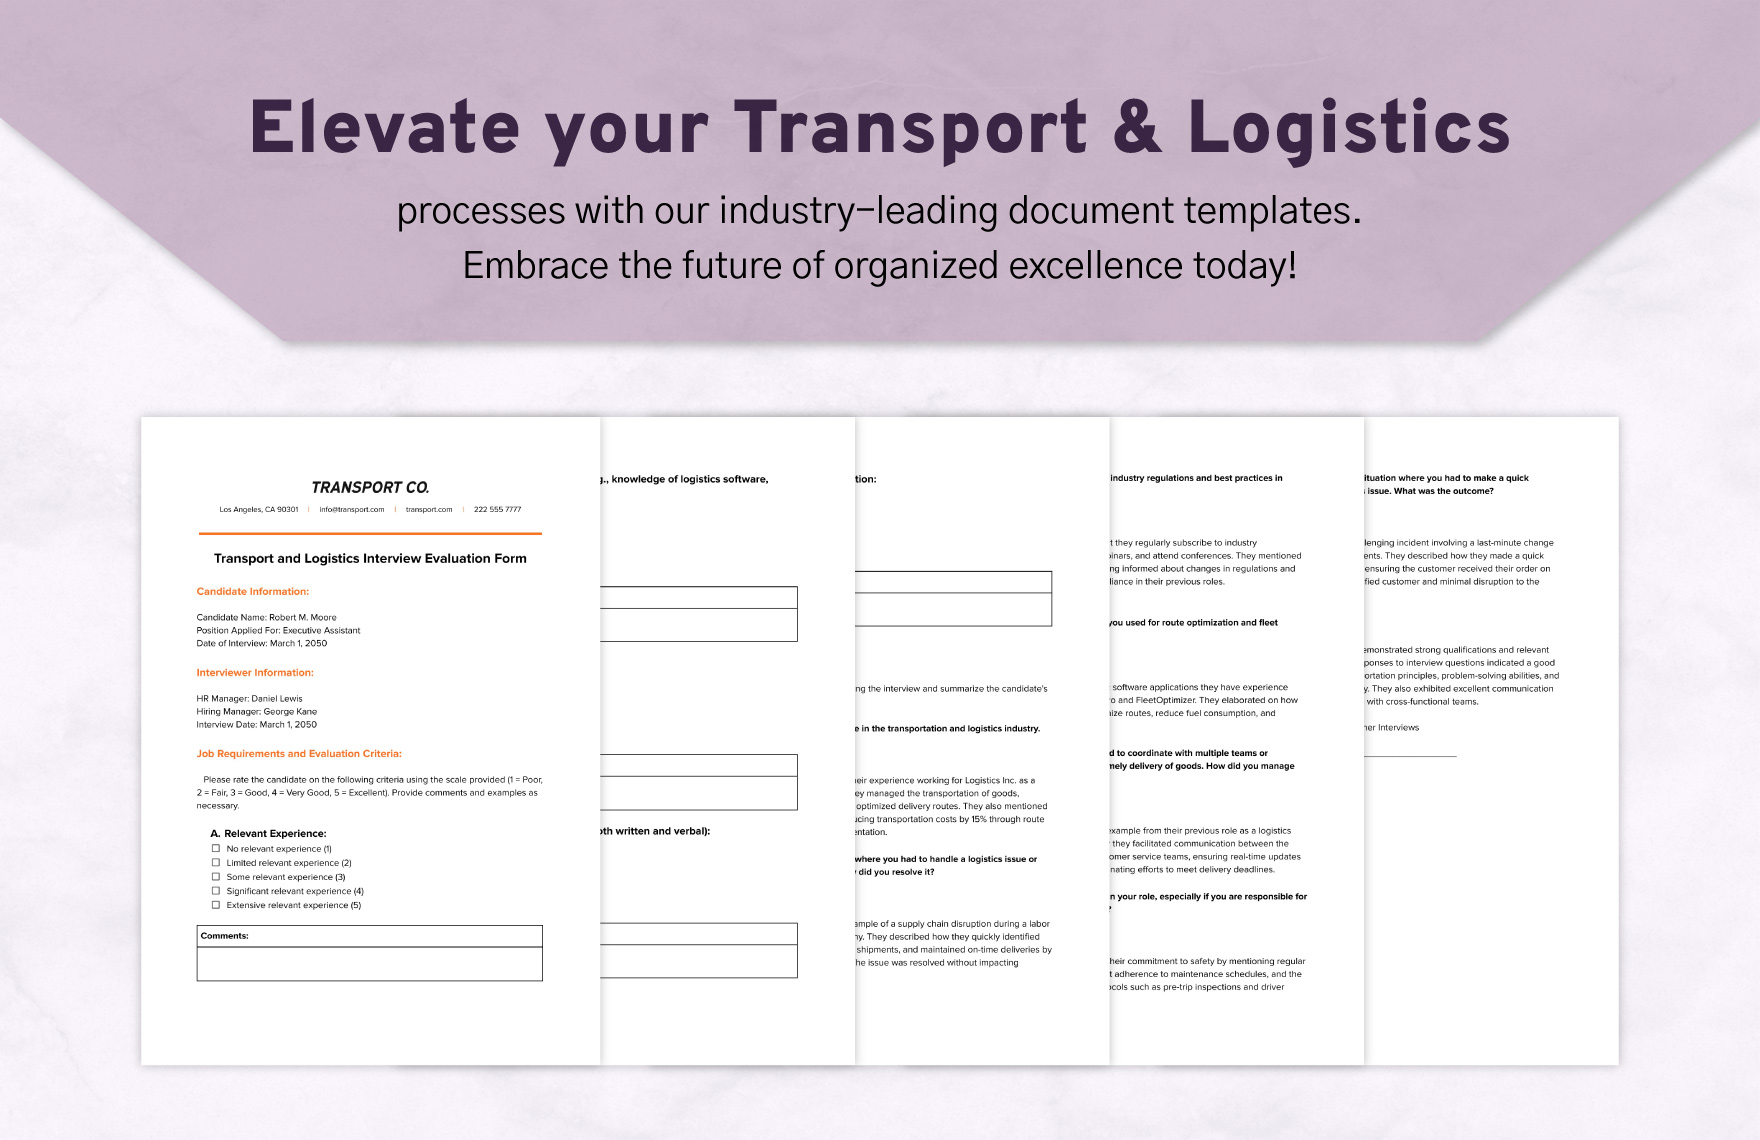 Transport and Logistics Interview Evaluation Form Template